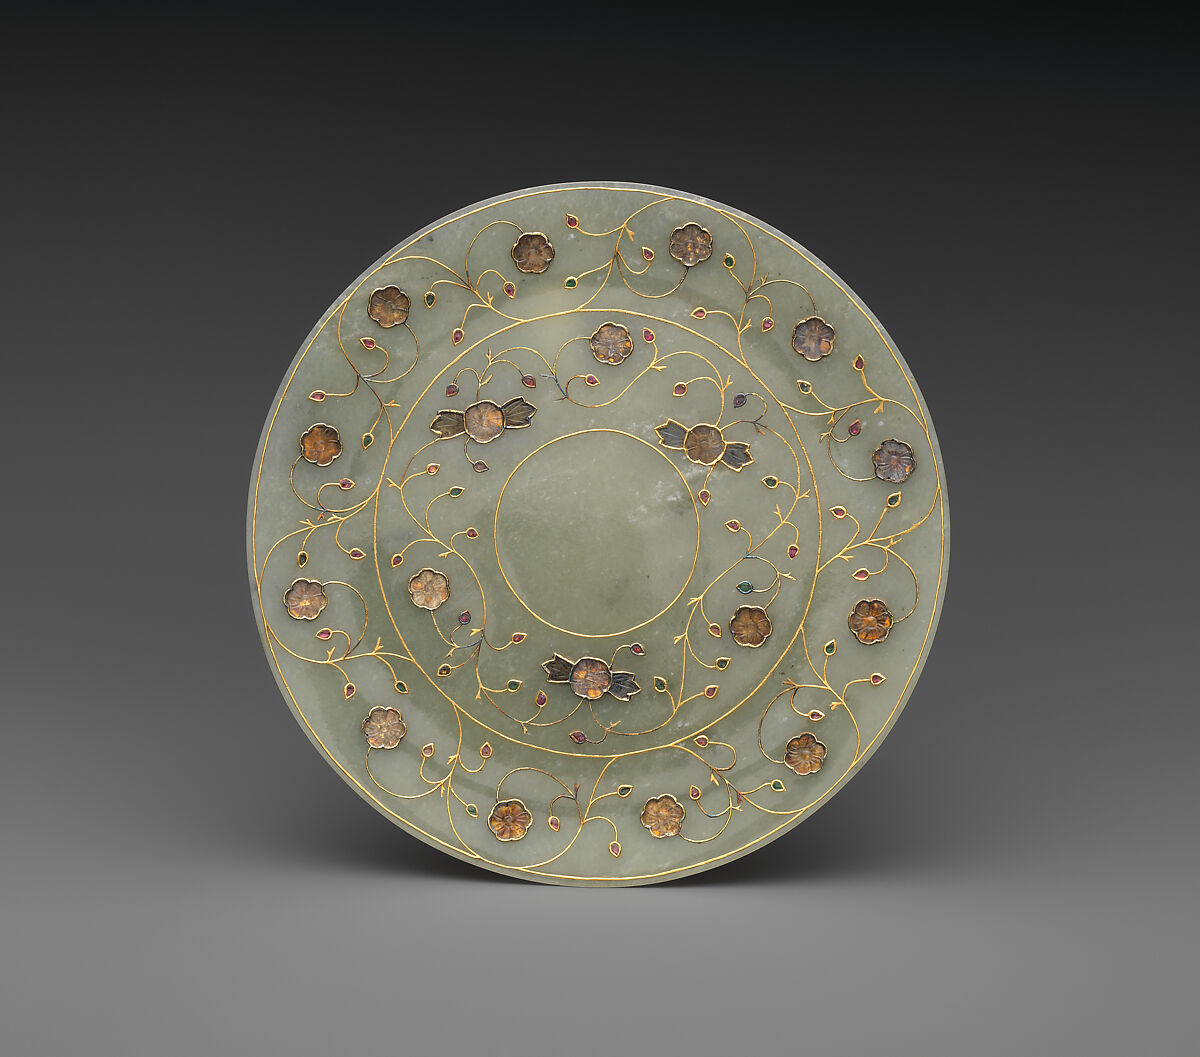 Jewelled plate, Jade (nephrite) with gold and semiprecious stone inlays, India 